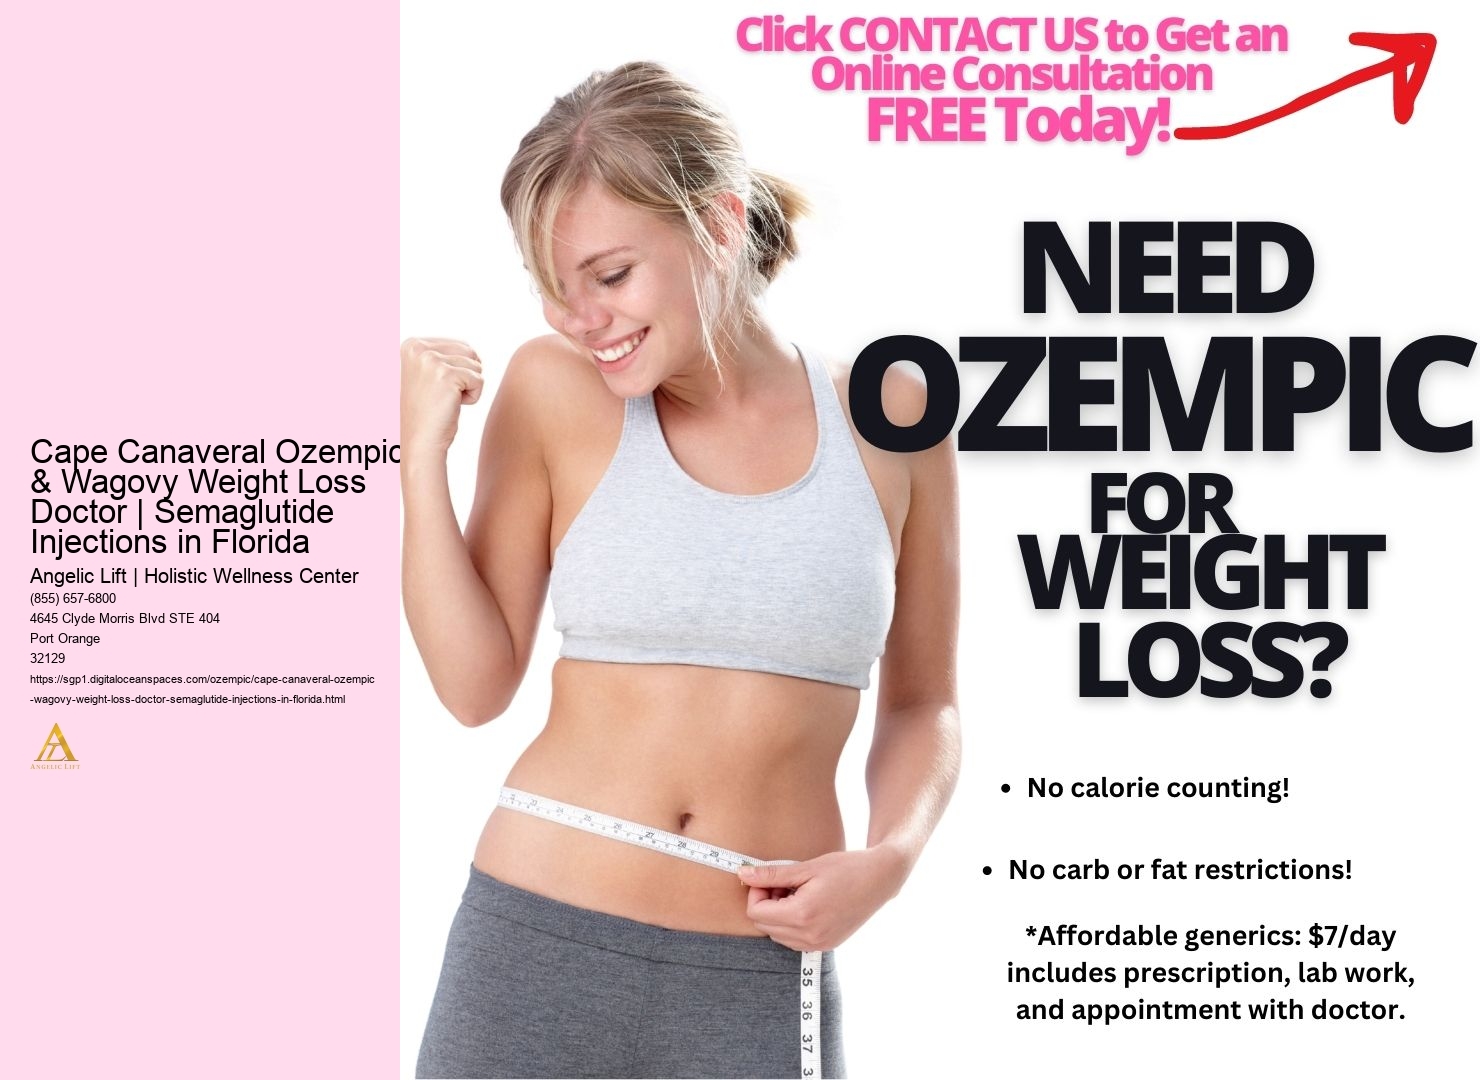 Cape Canaveral Ozempic & Wagovy Weight Loss Doctor | Semaglutide Injections in Florida